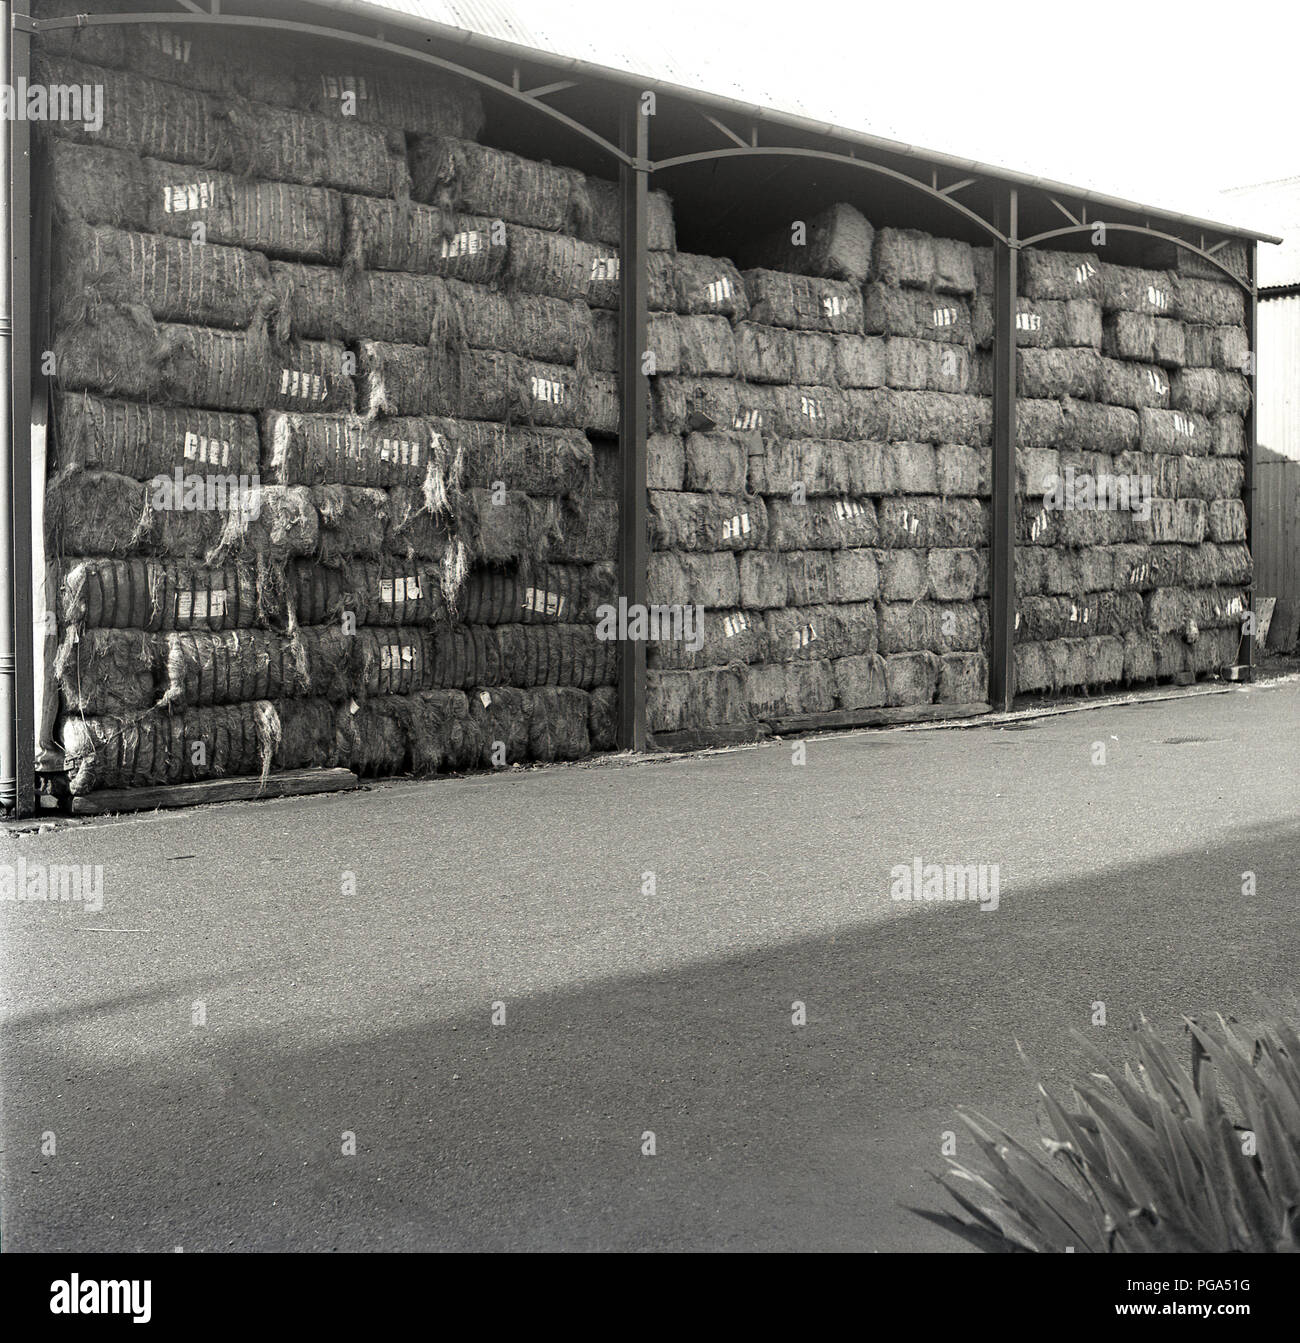 1950s, historical, paper pulp bales stored outside in the open air under cover at Brittains, a leading British paper mill of this era, England, UK. Stock Photo